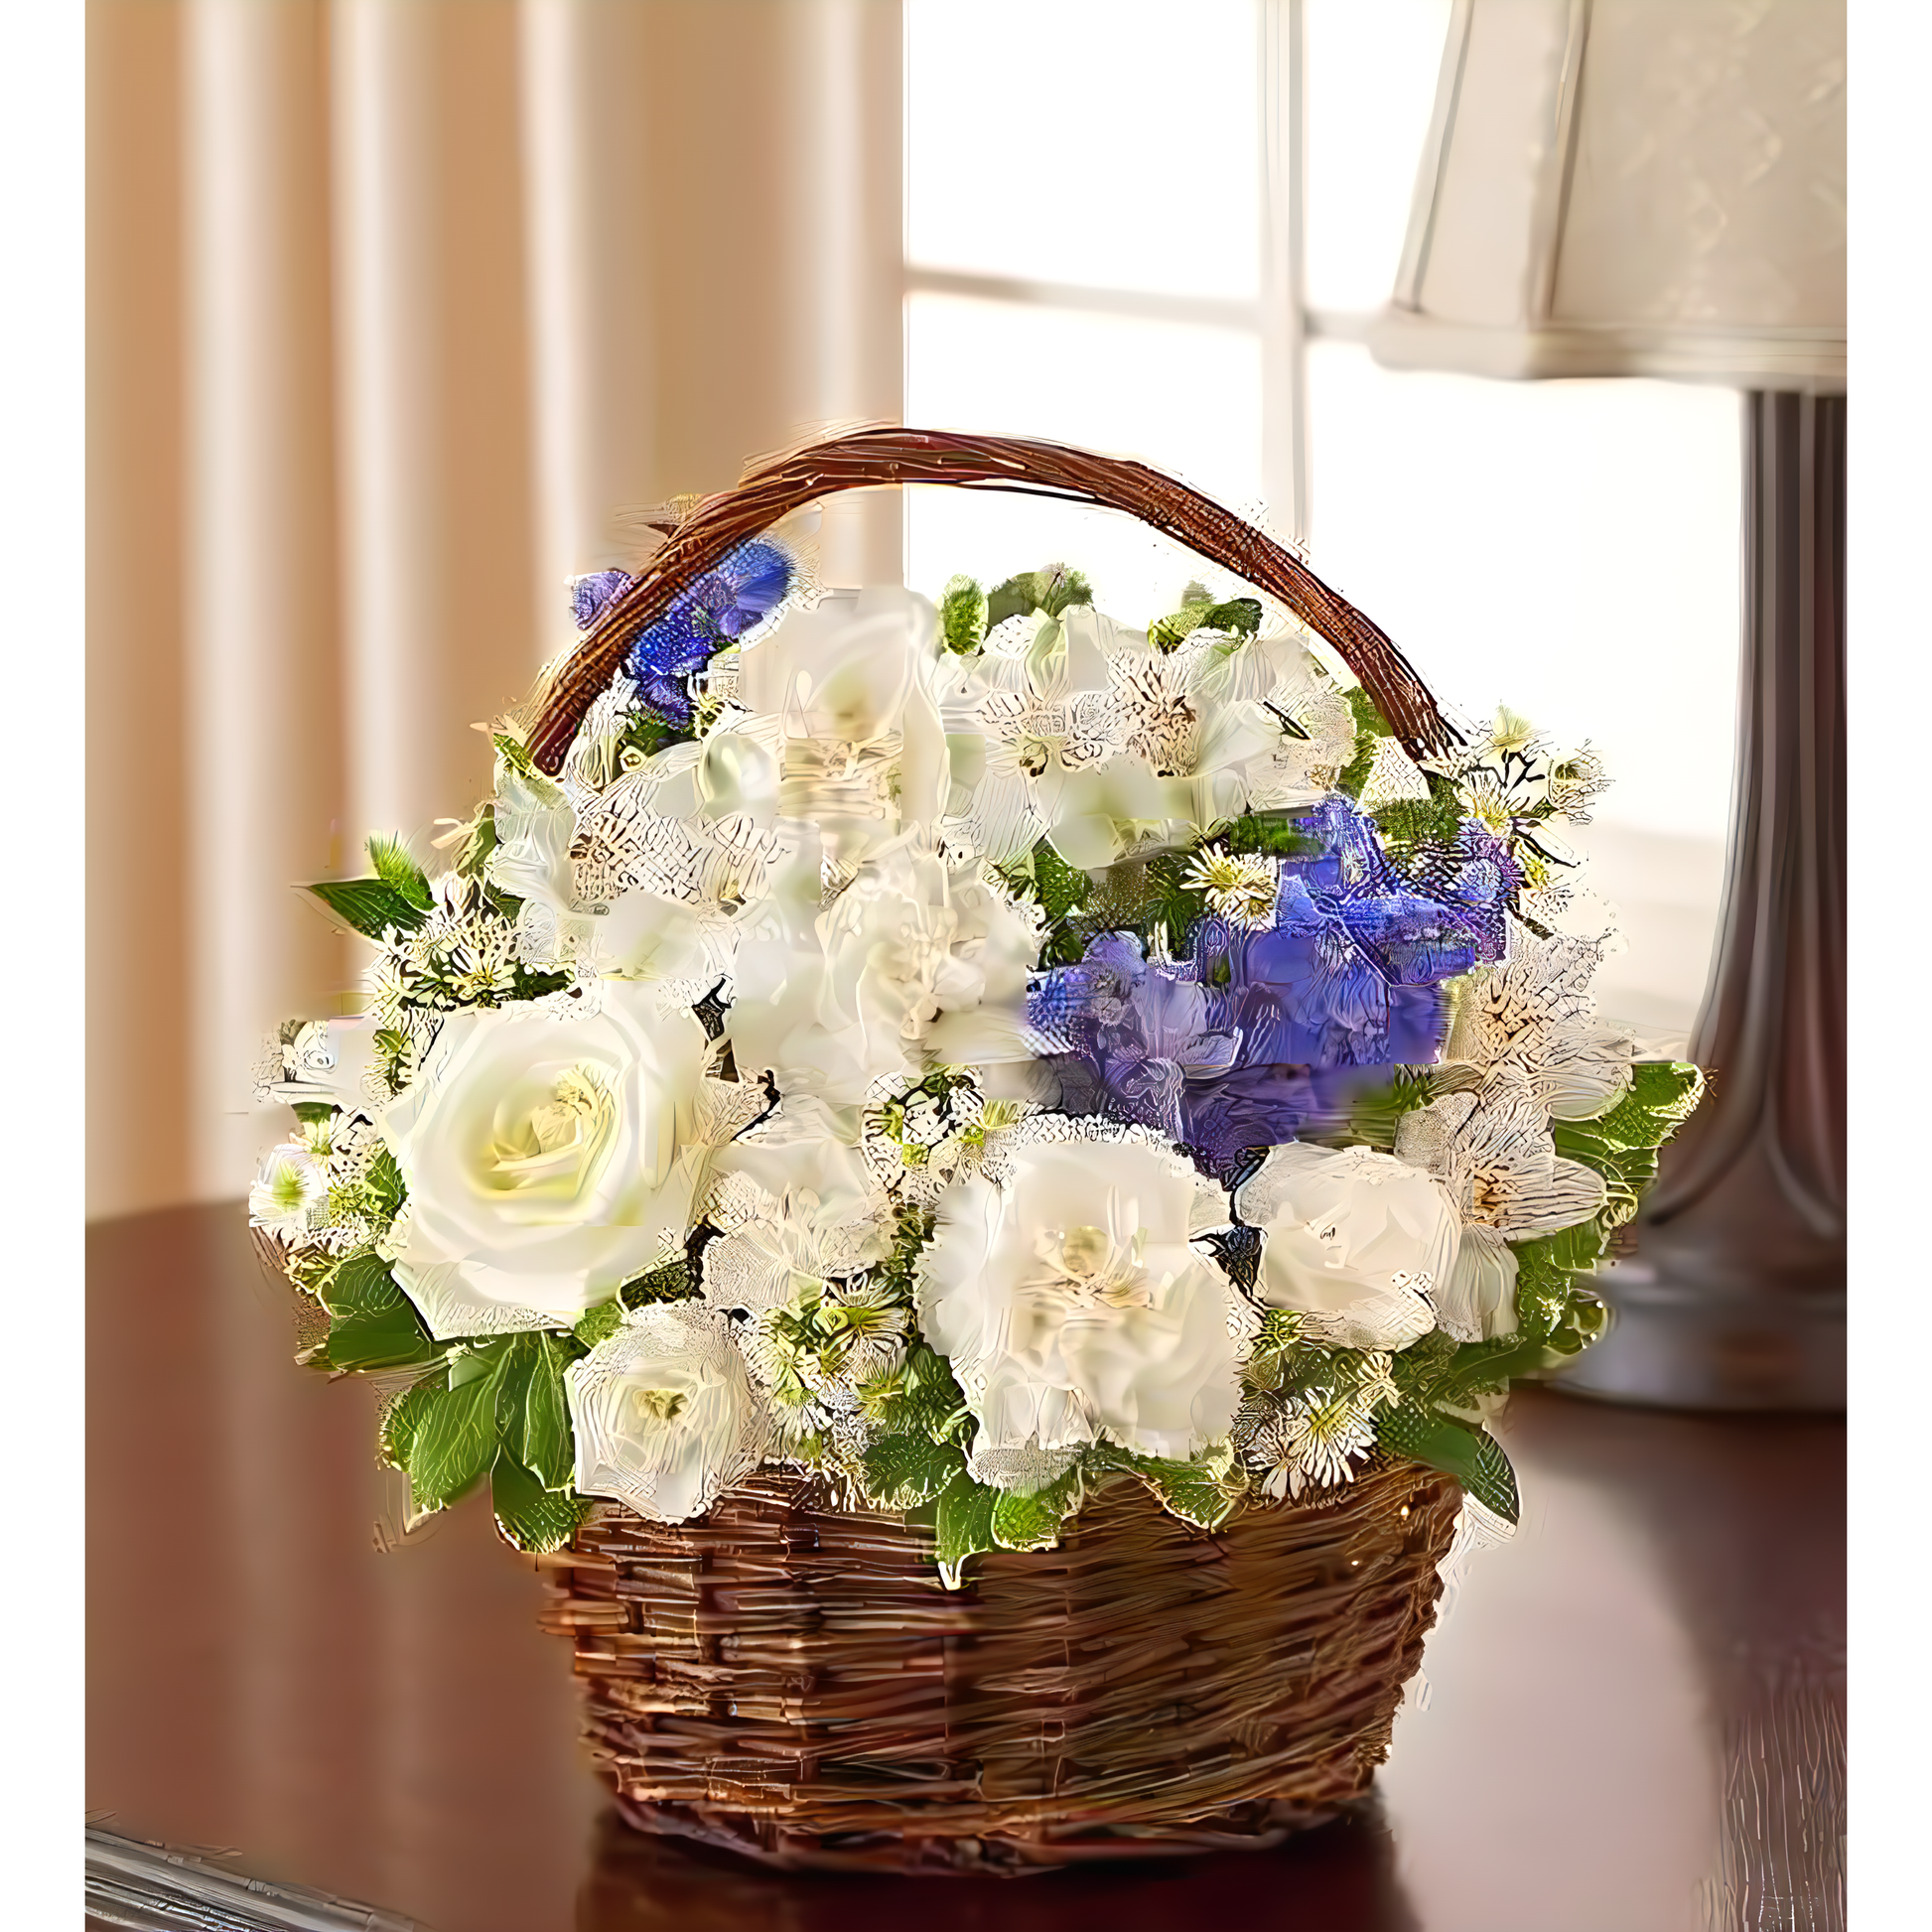 NYC Flower Delivery - Peace, Prayers & Blessings - Blue and White - Fresh Cut Flowers